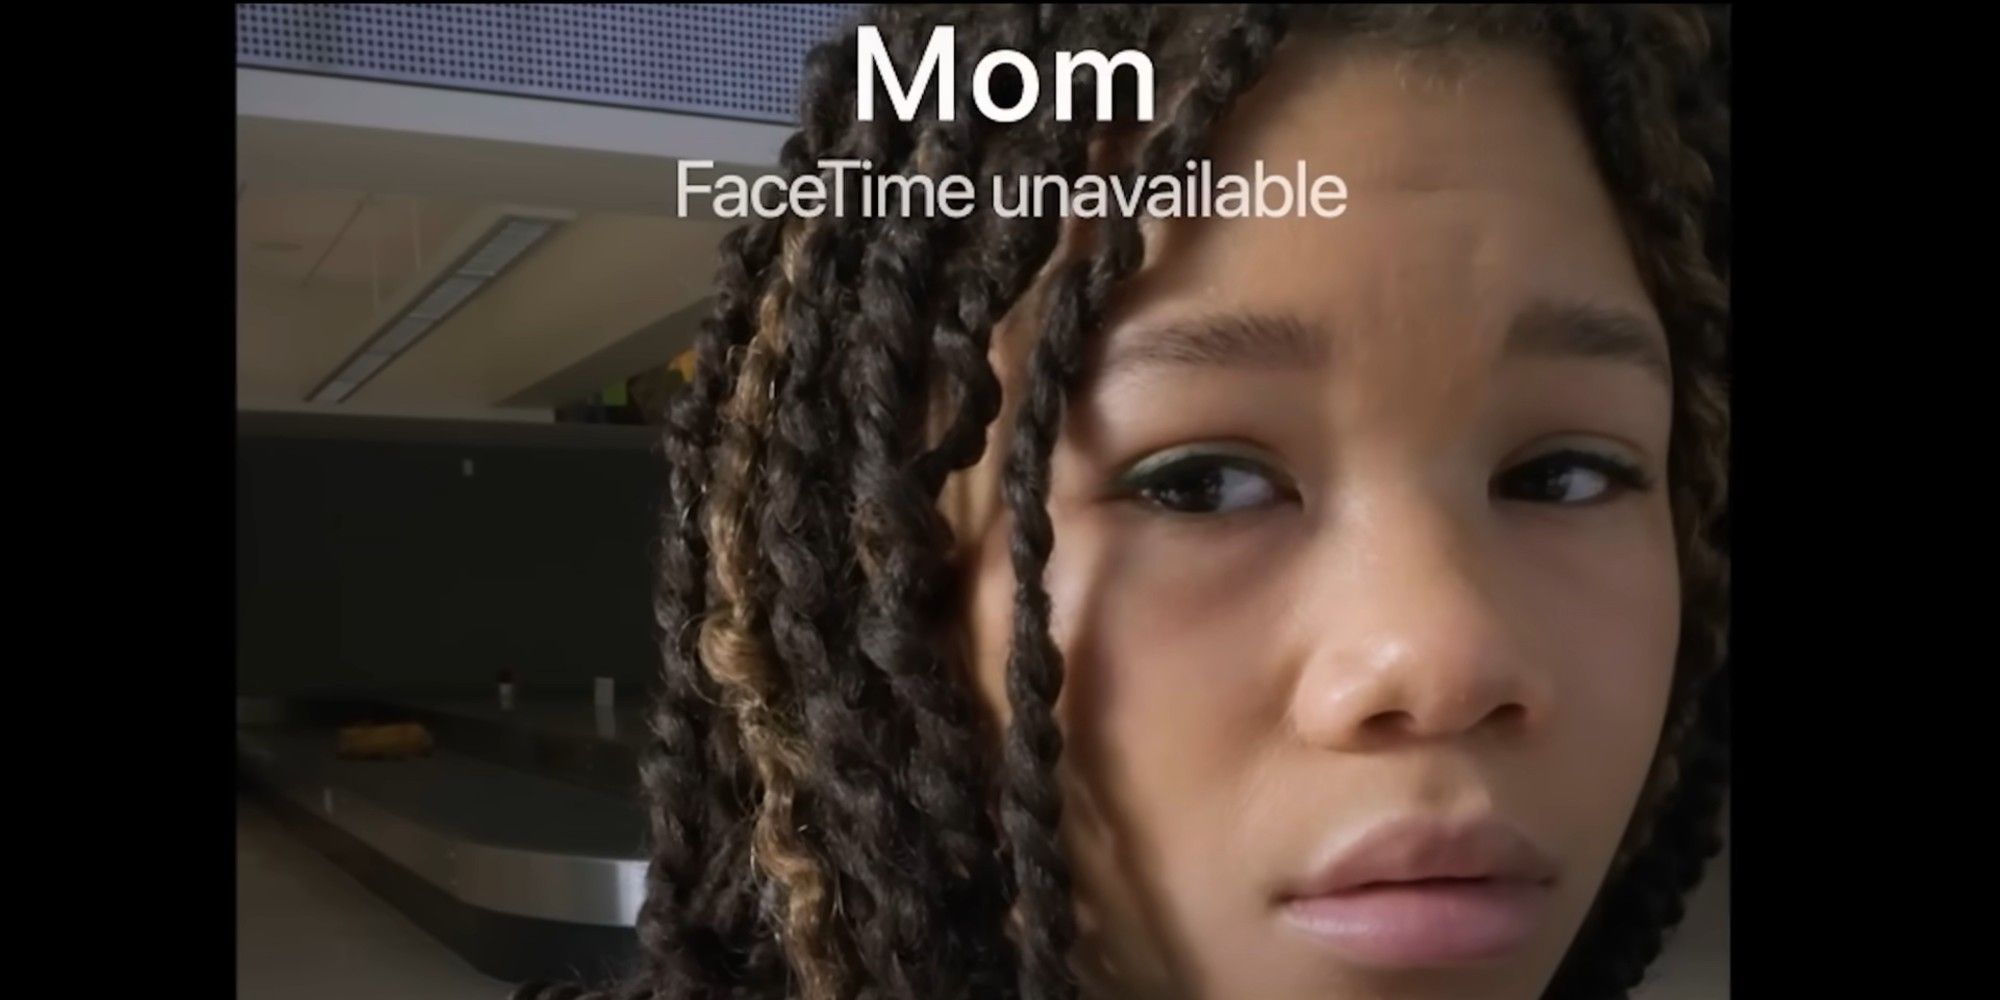 Storm Reid in Missing with the words Mom FaceTime Unavailable